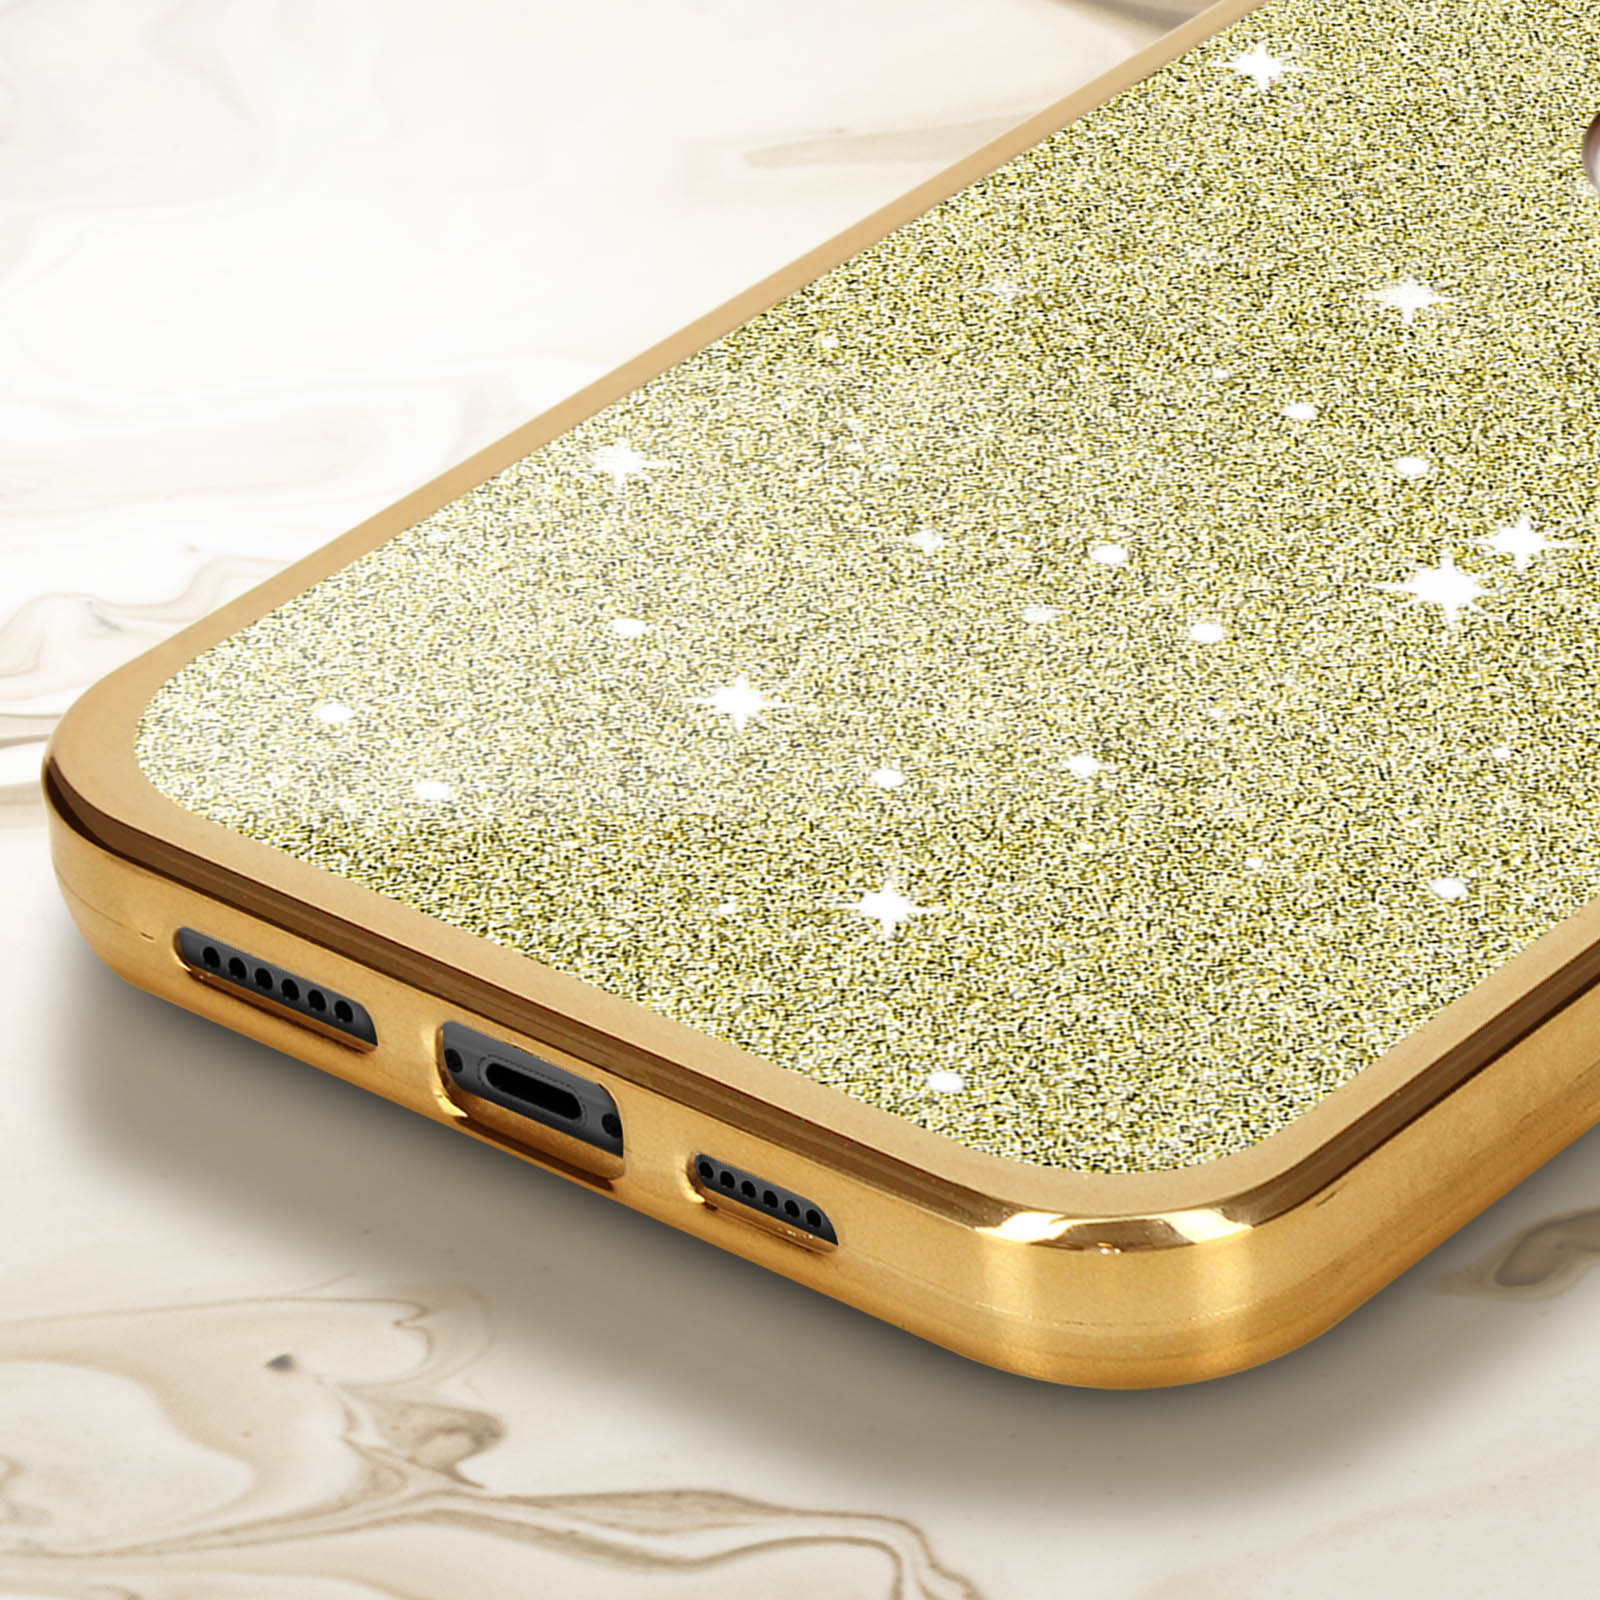 AVIZAR Protecam Spark XS, Gold Apple, iPhone Series, Backcover